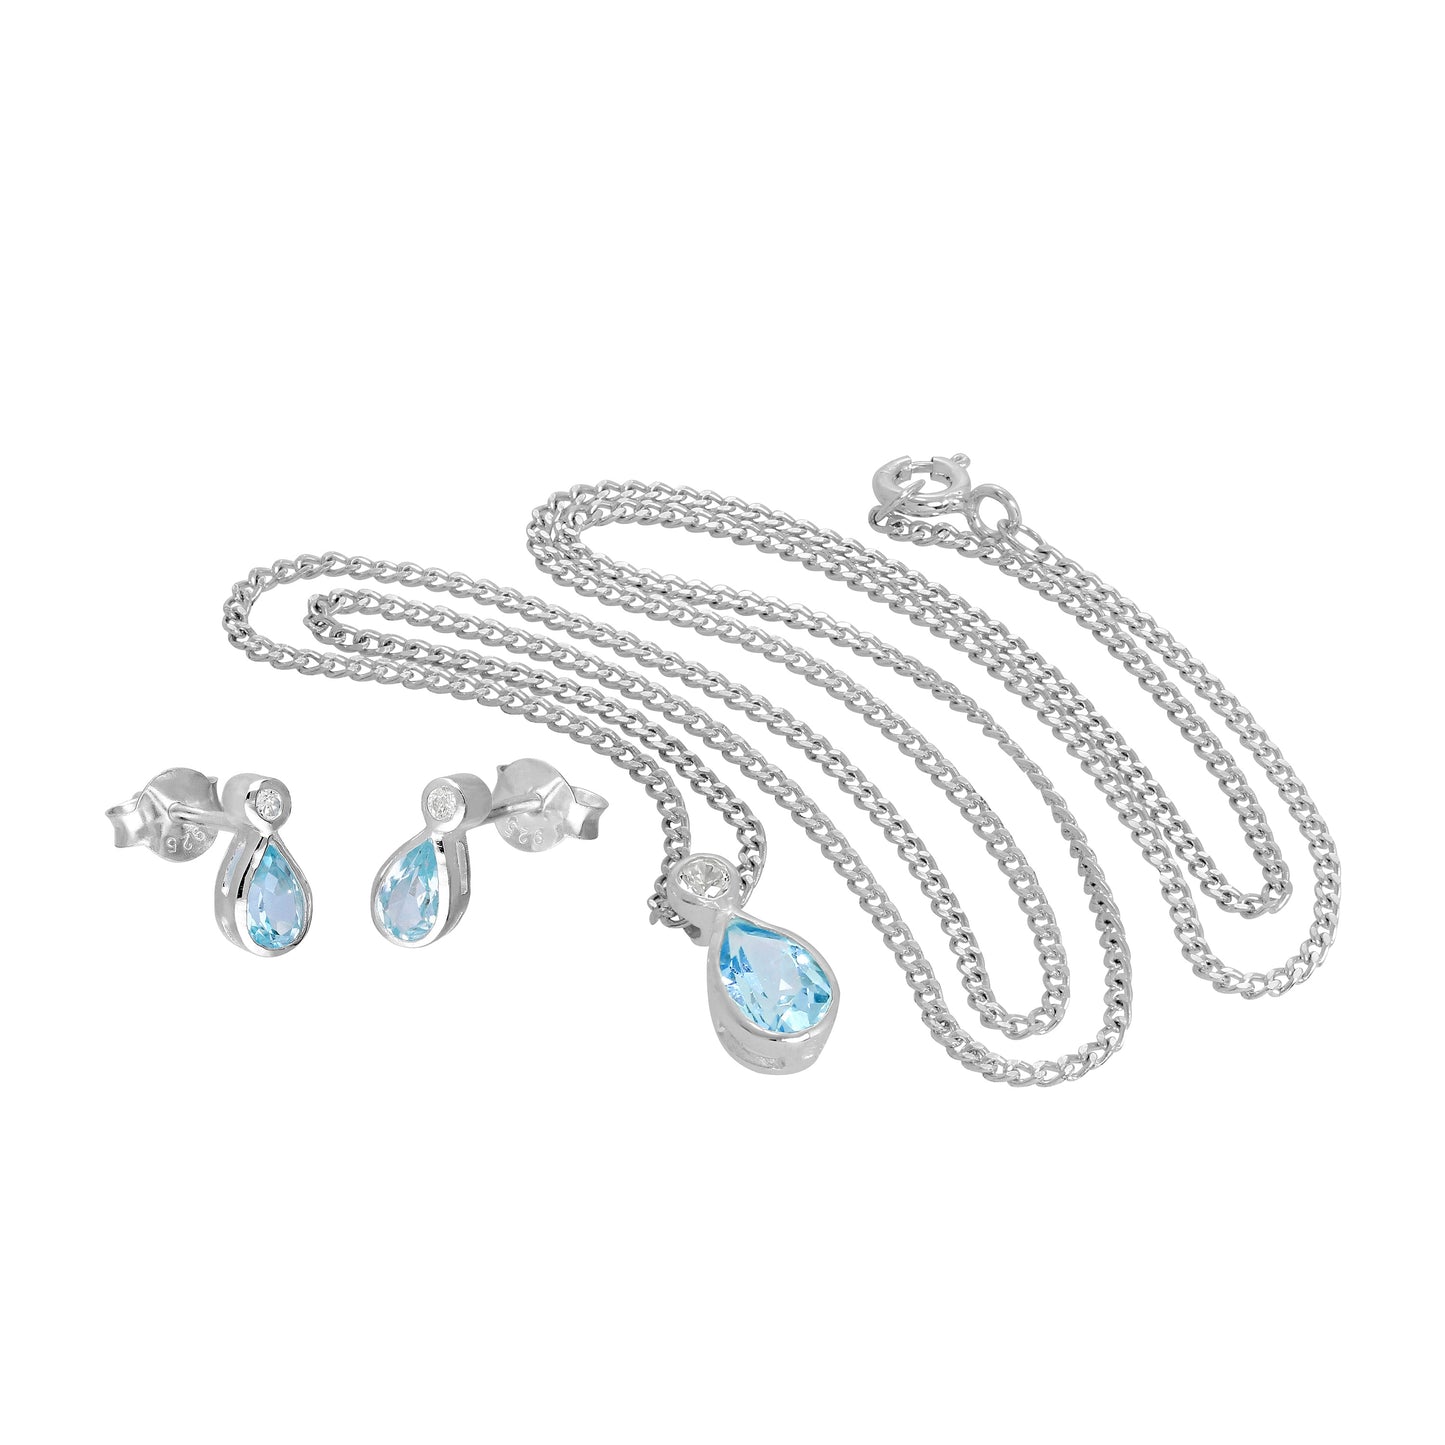 Sterling Silver Sky Blue Topaz & CZ Crystal Teardrop Pendant on 16 - 24 Inches Chain and Earrings Set